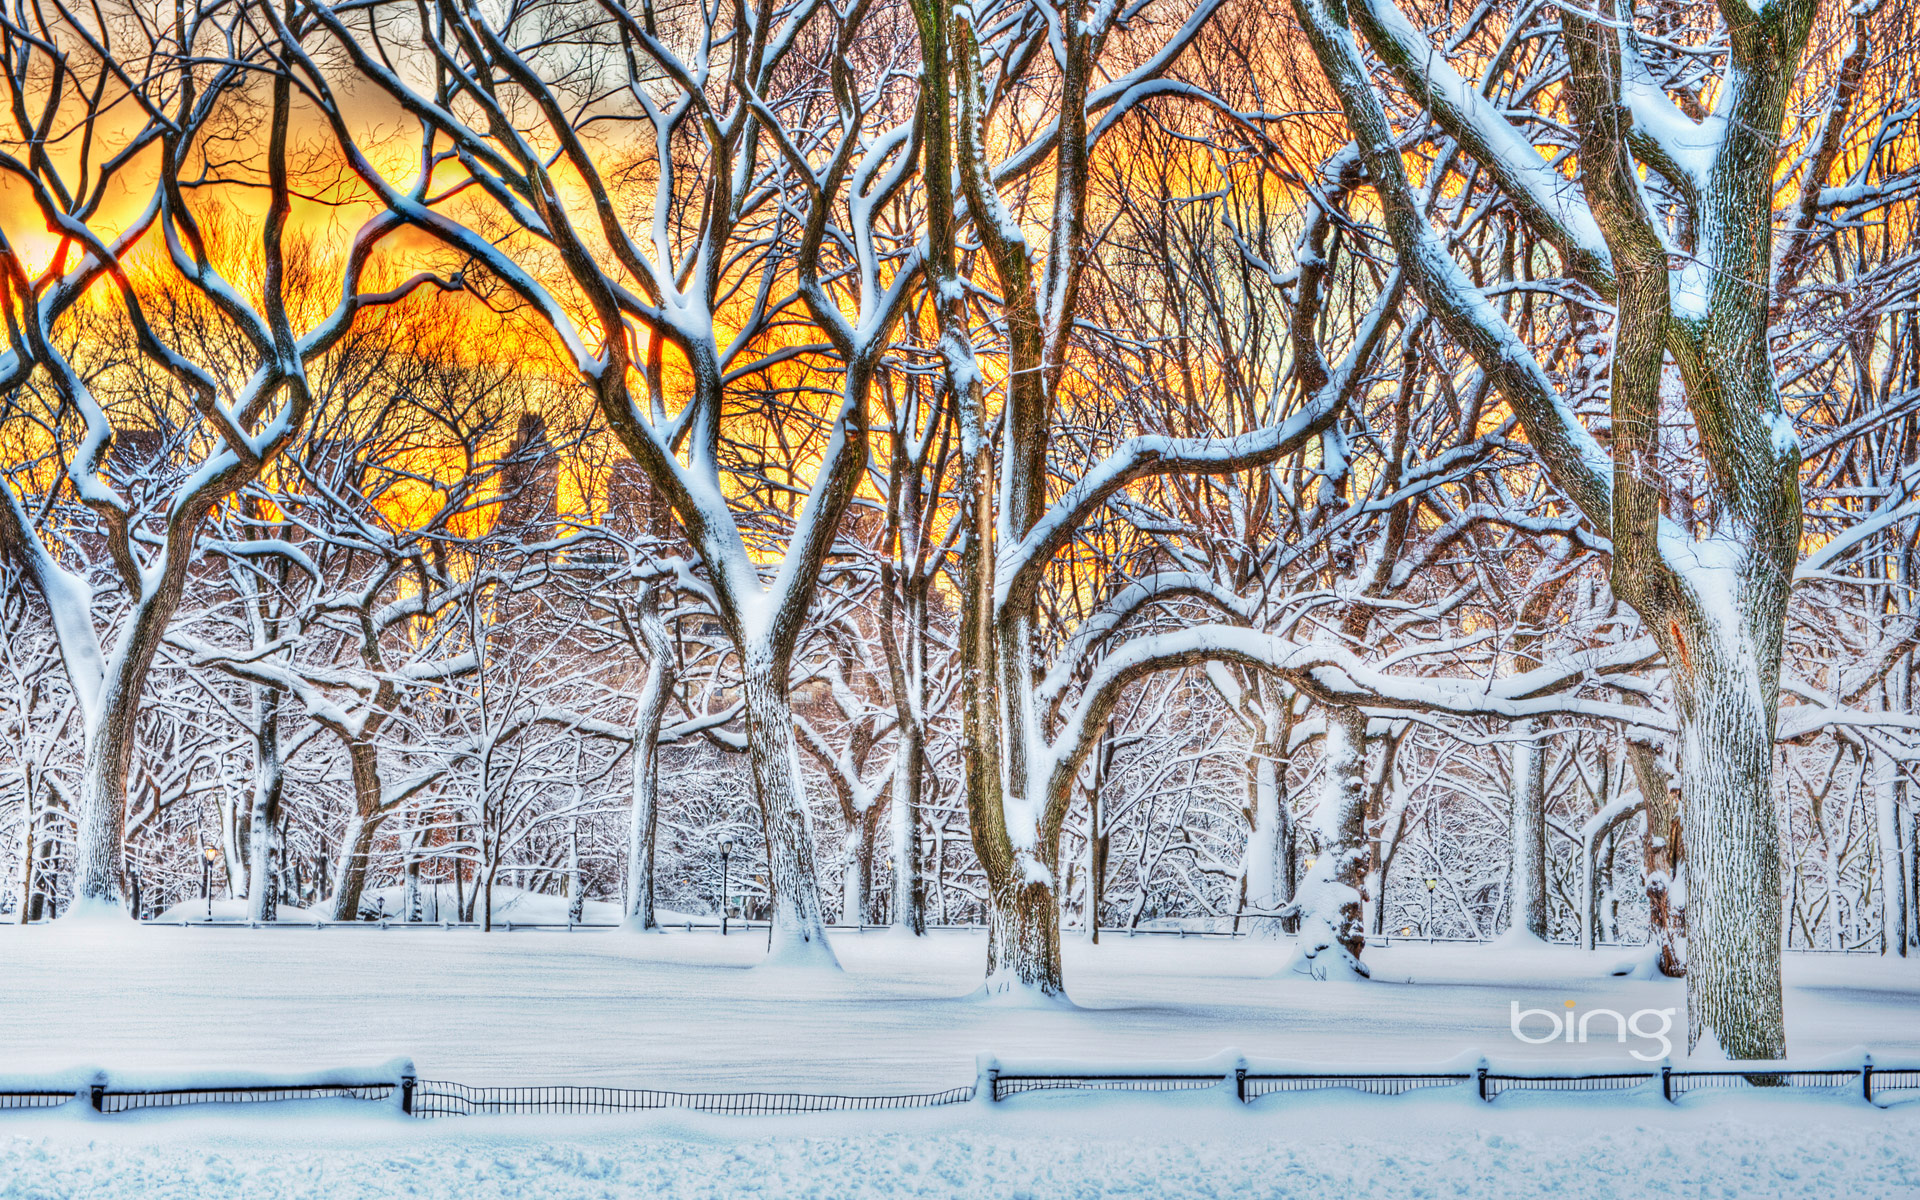 Sunrise in Central Park after a snowstorm in New York City, New York